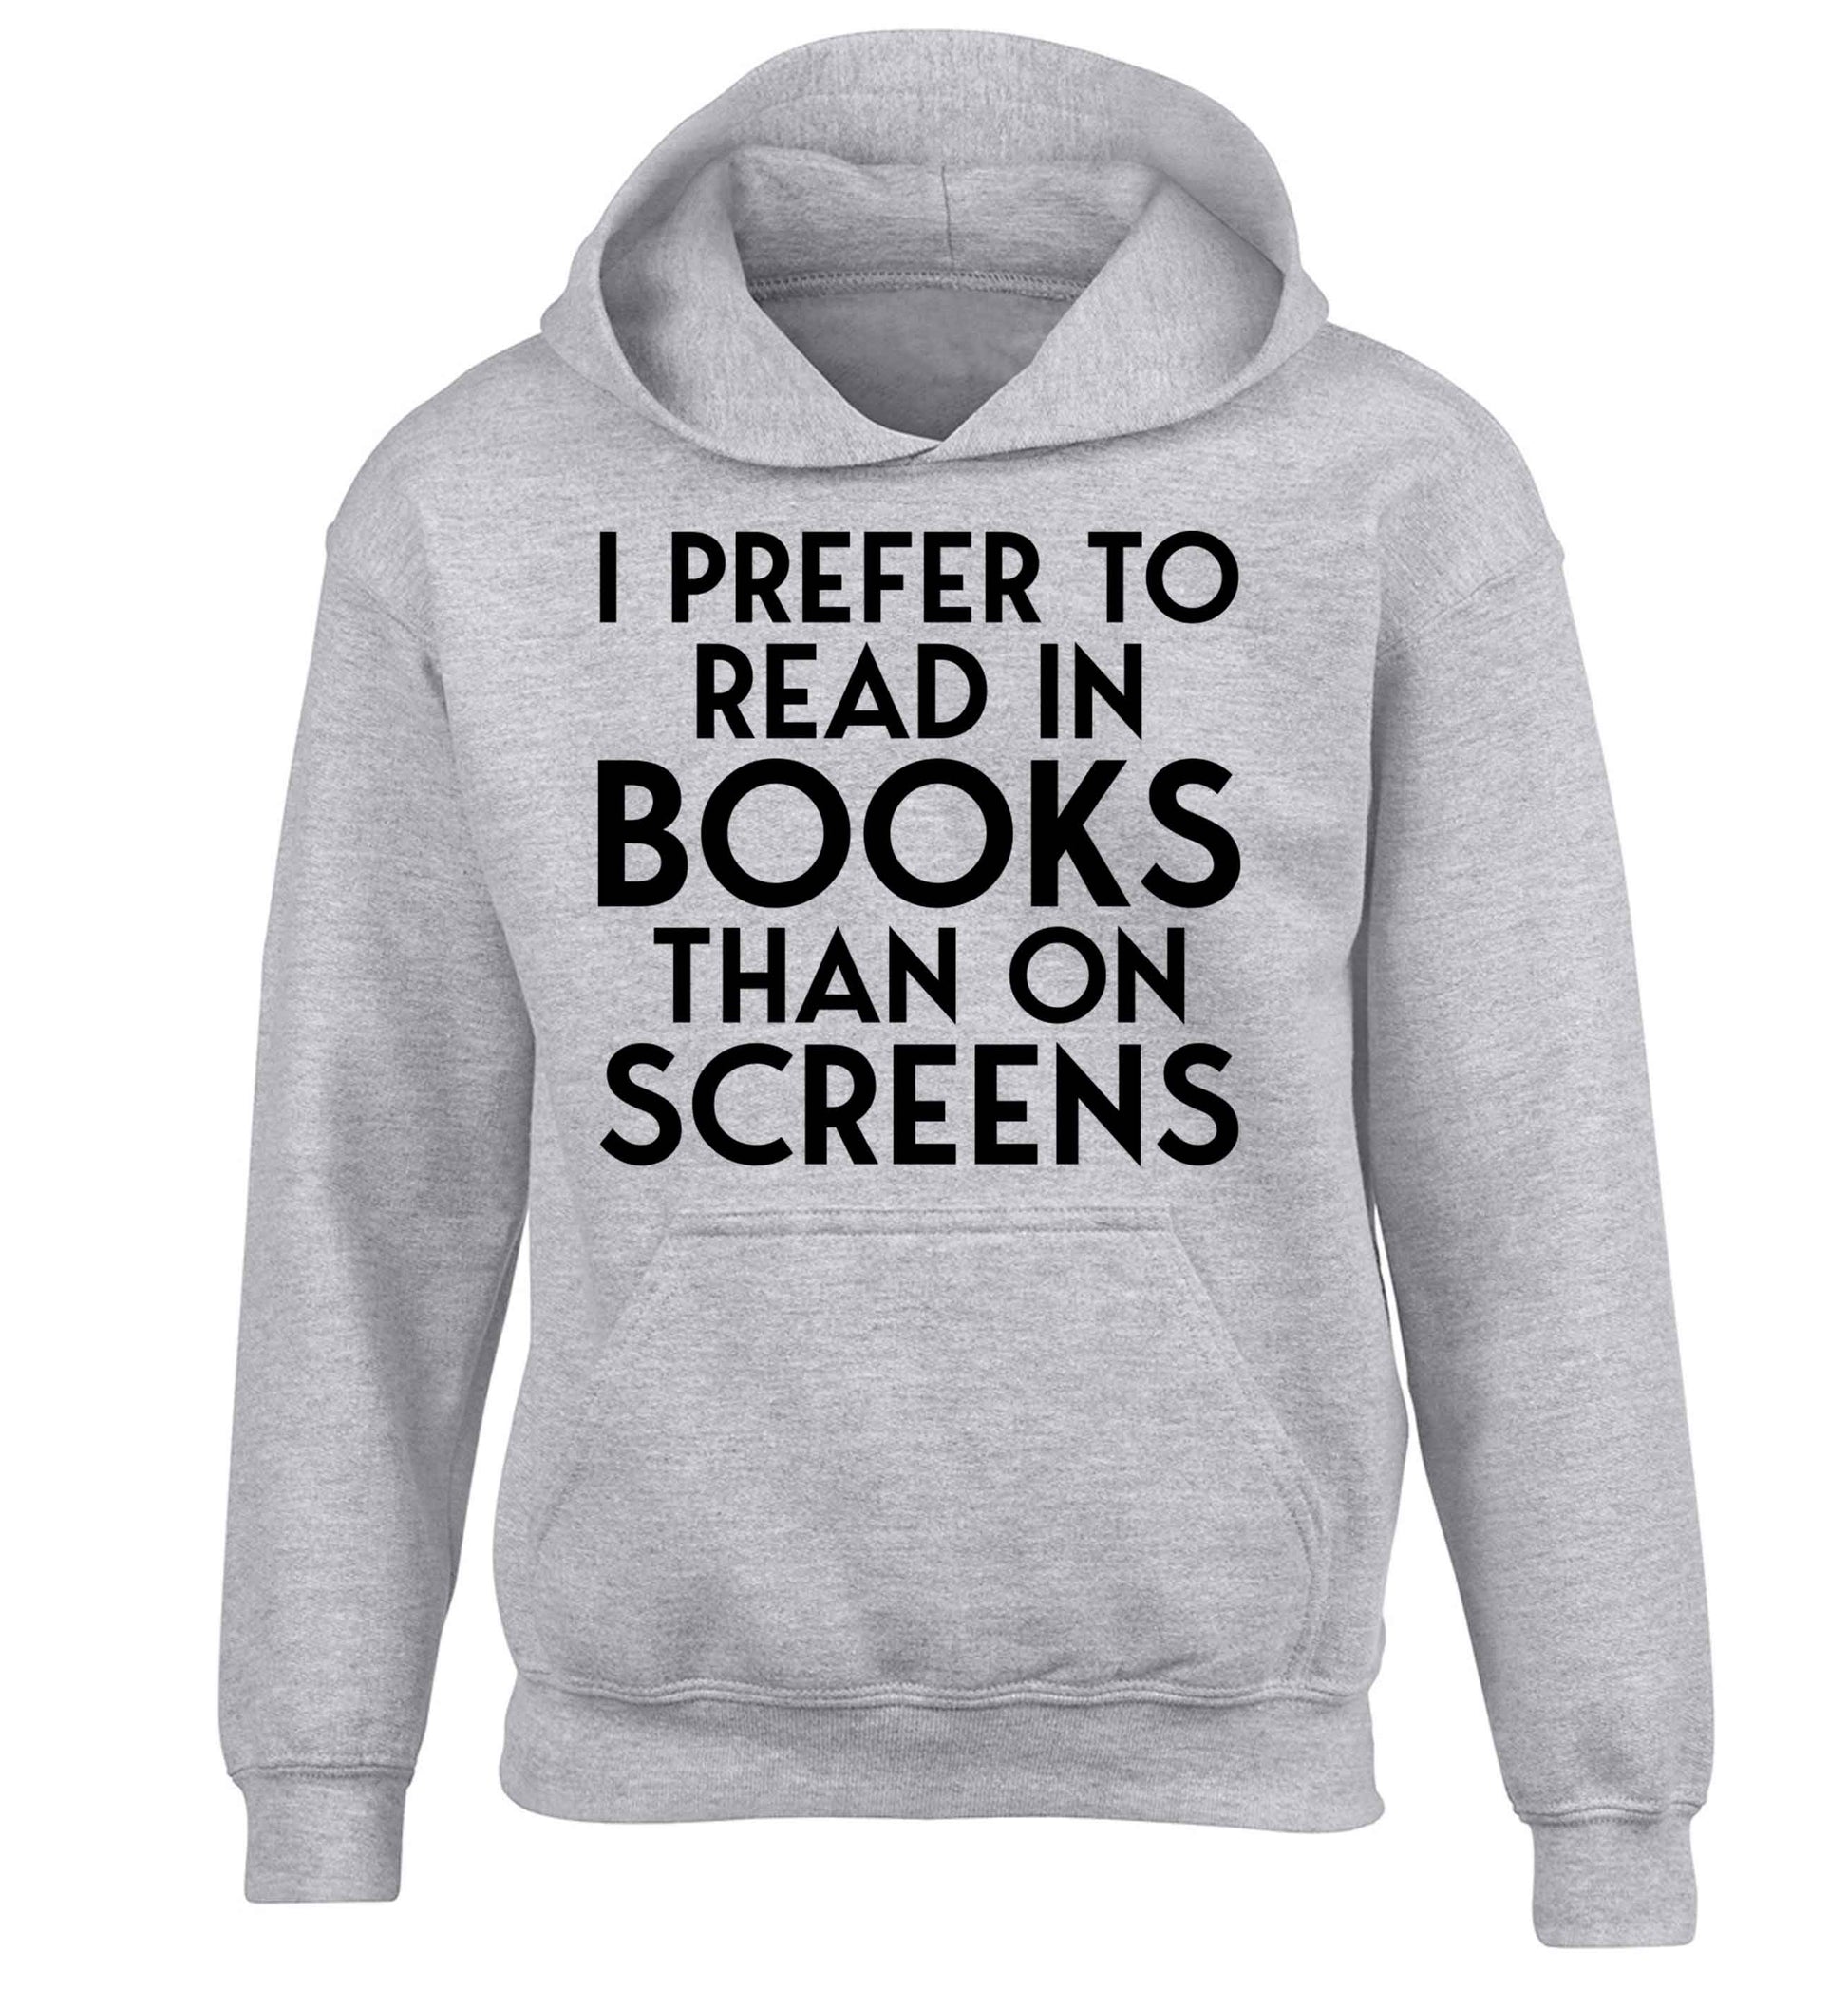 I prefer to read in books than on screens children's grey hoodie 12-13 Years